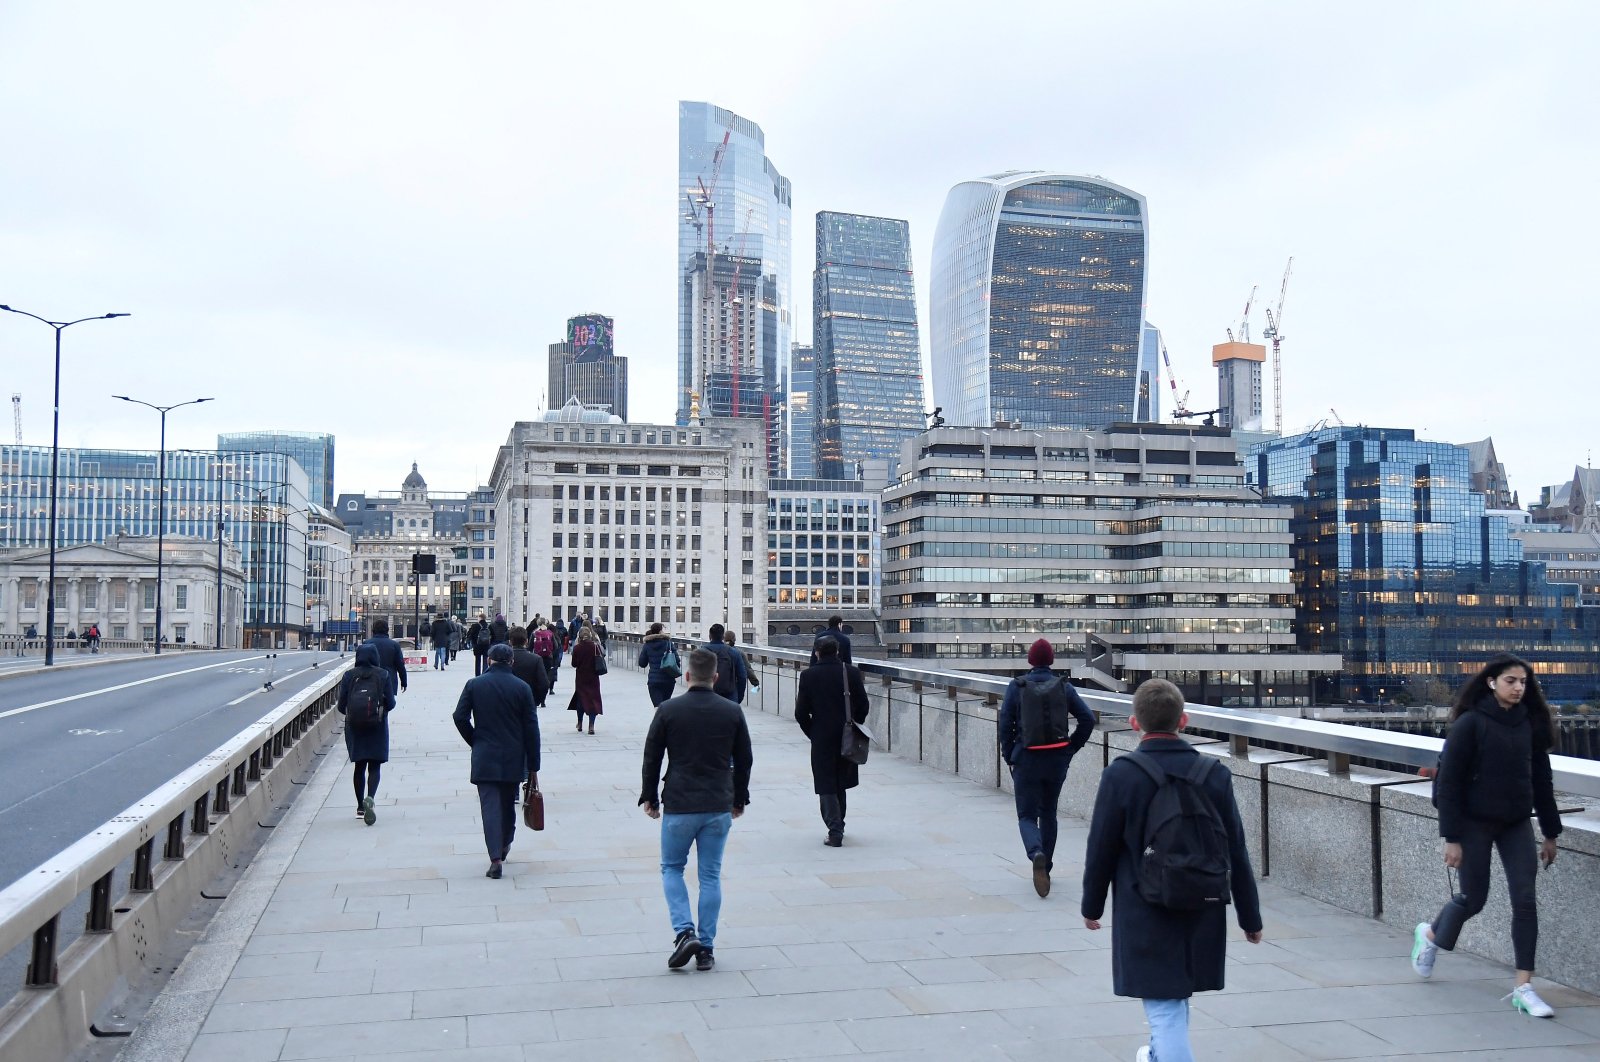 Workers cross London Bridge, with the City of London financial district seen behind, during the morning rush-hour, in London, U.K., Jan. 4, 2022. (Reuters Photo)